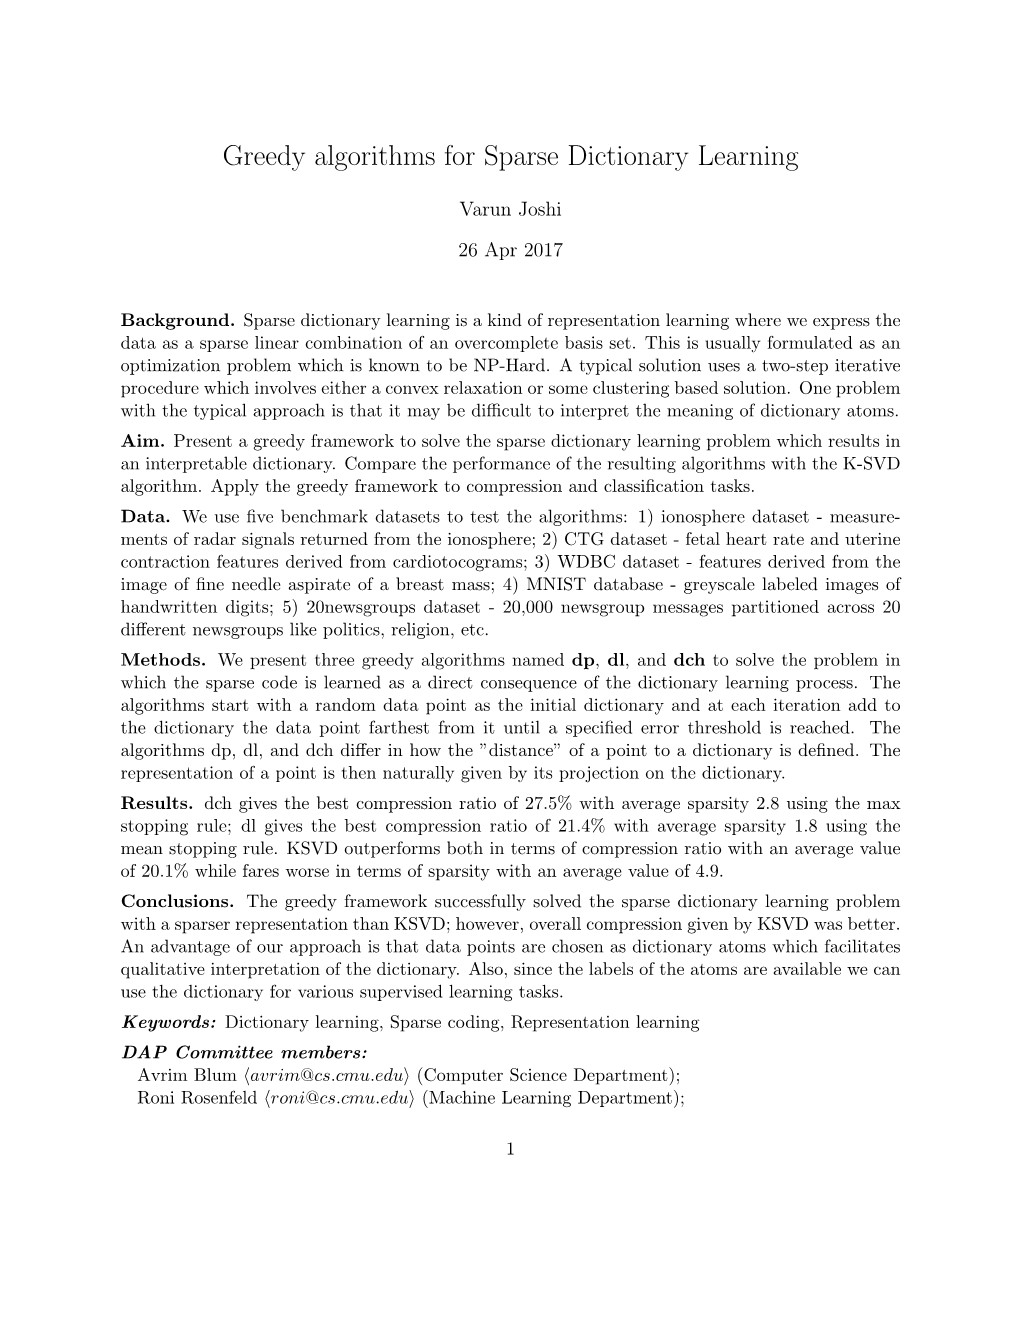 Greedy Algorithms for Sparse Dictionary Learning